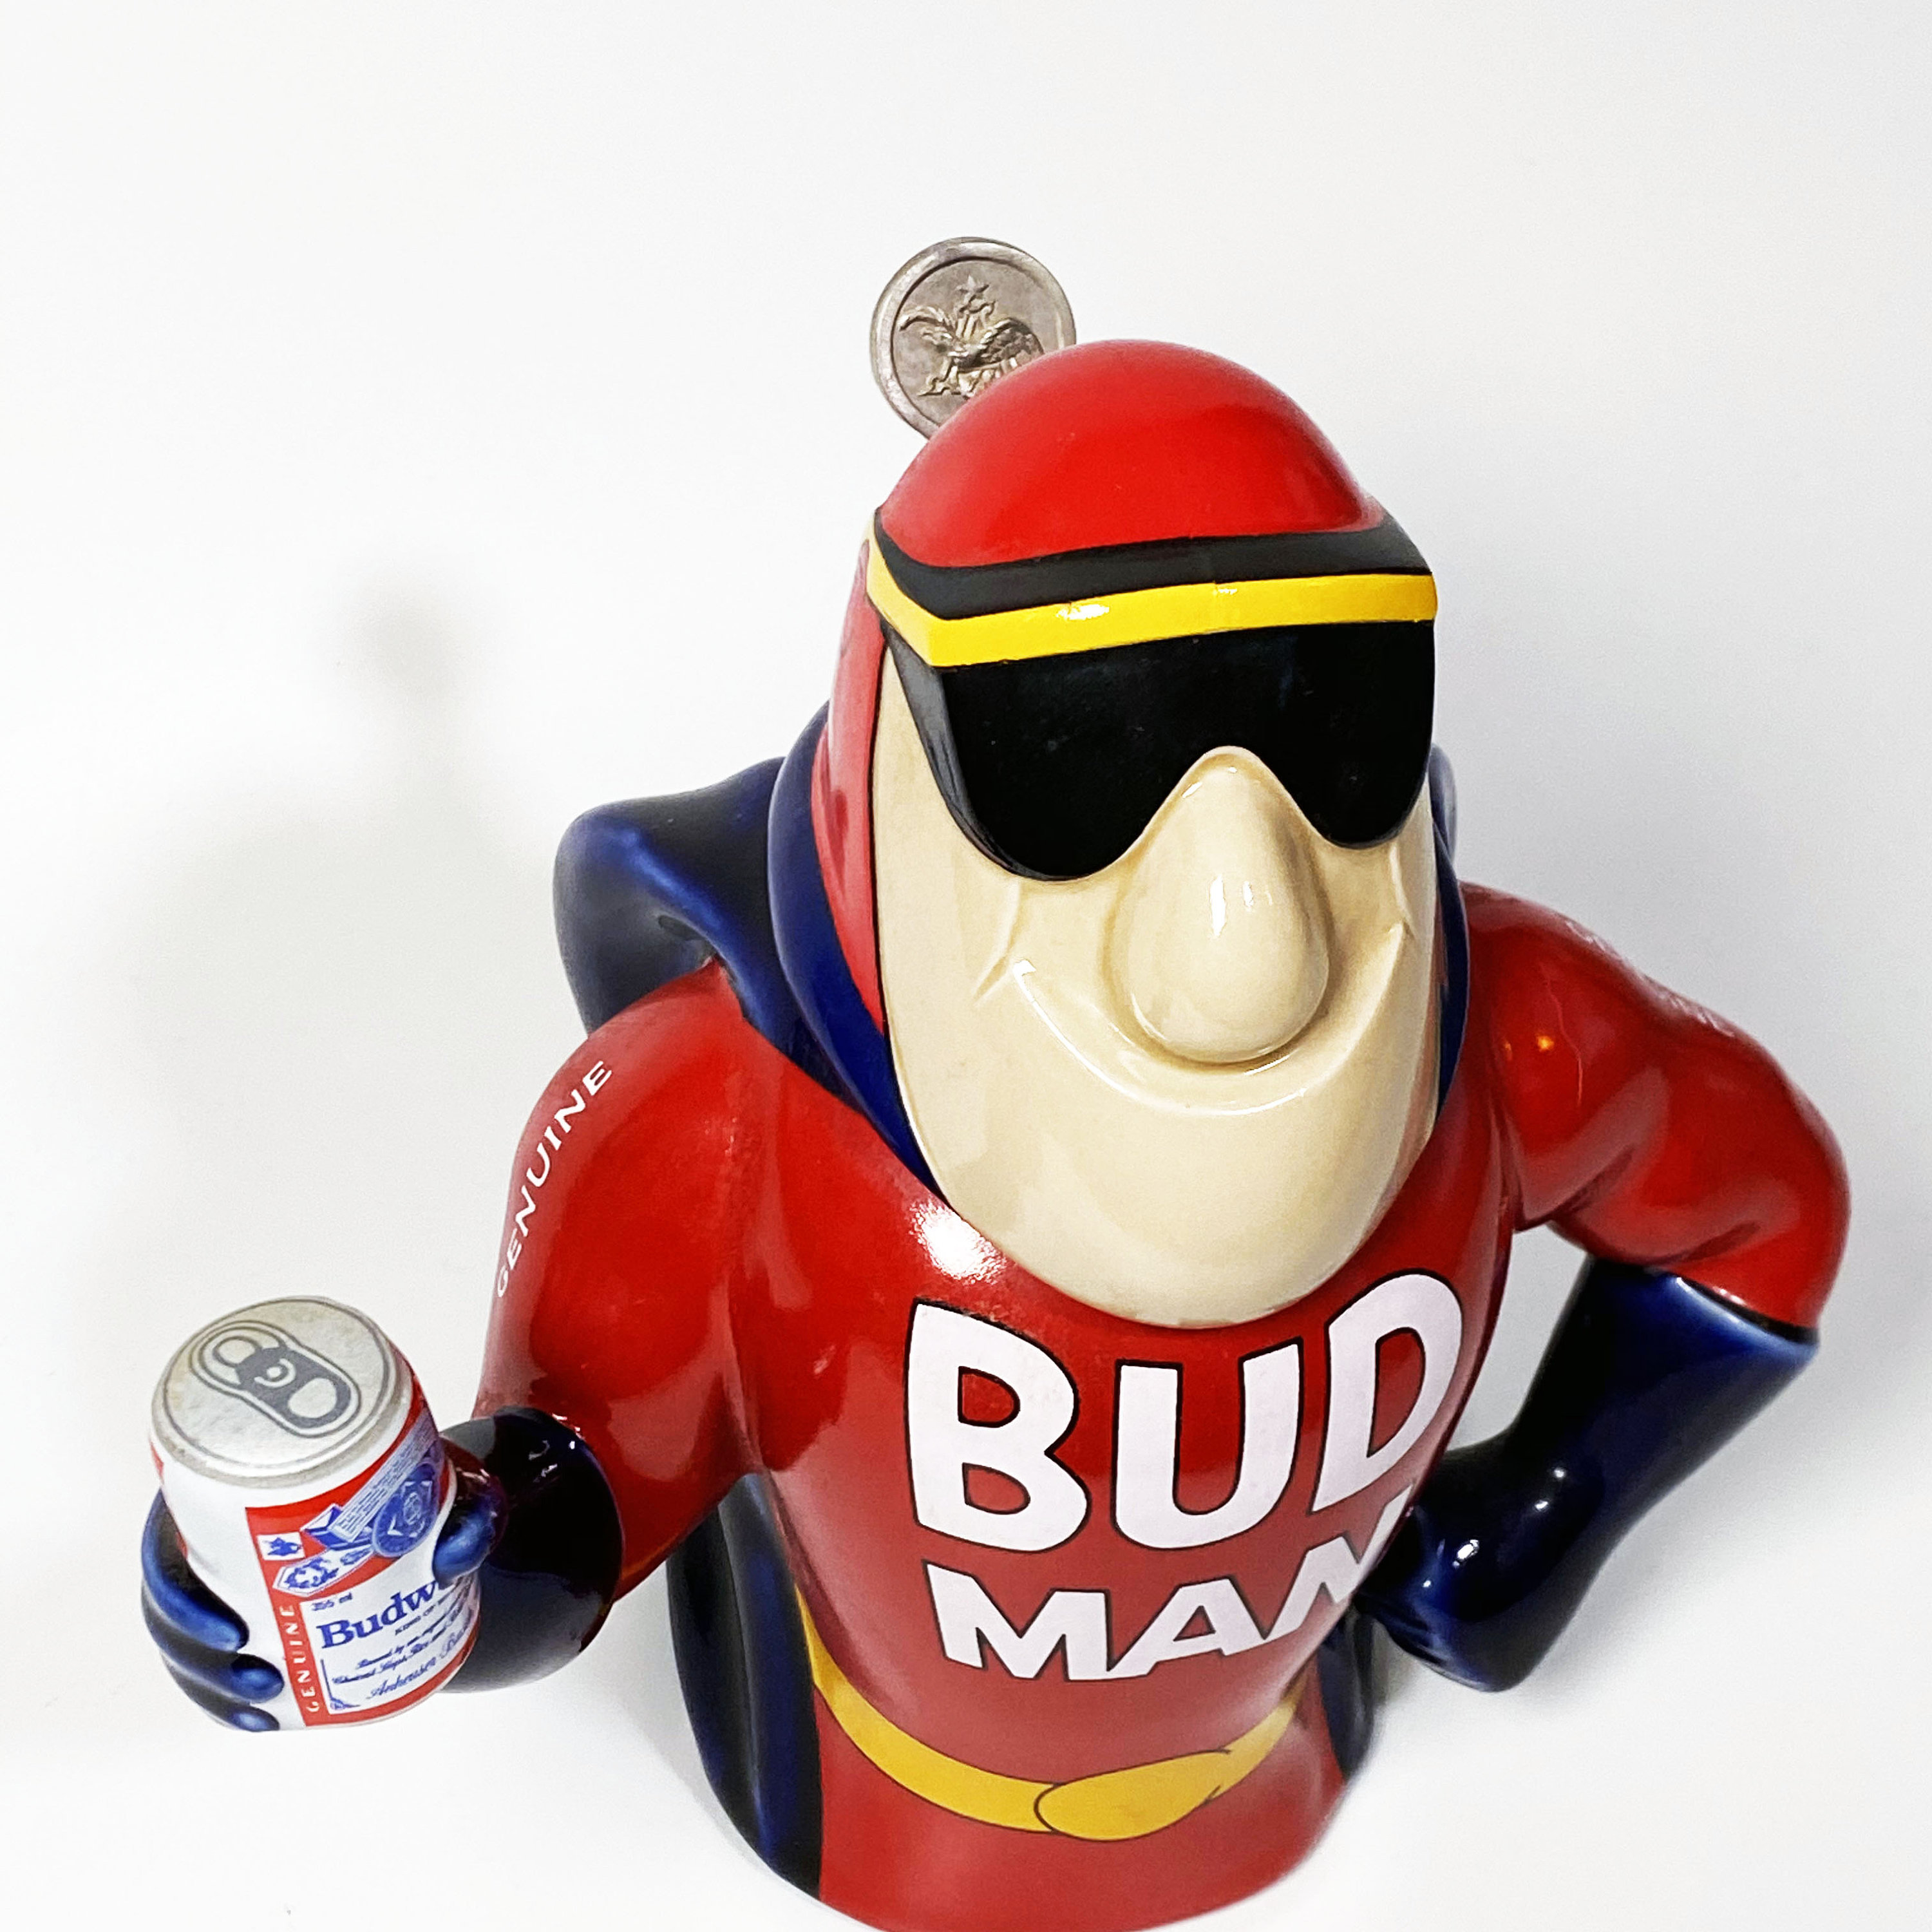 Vintage 1993 Bud Man With Can Beer Stein Mug Budweiser 90s Great